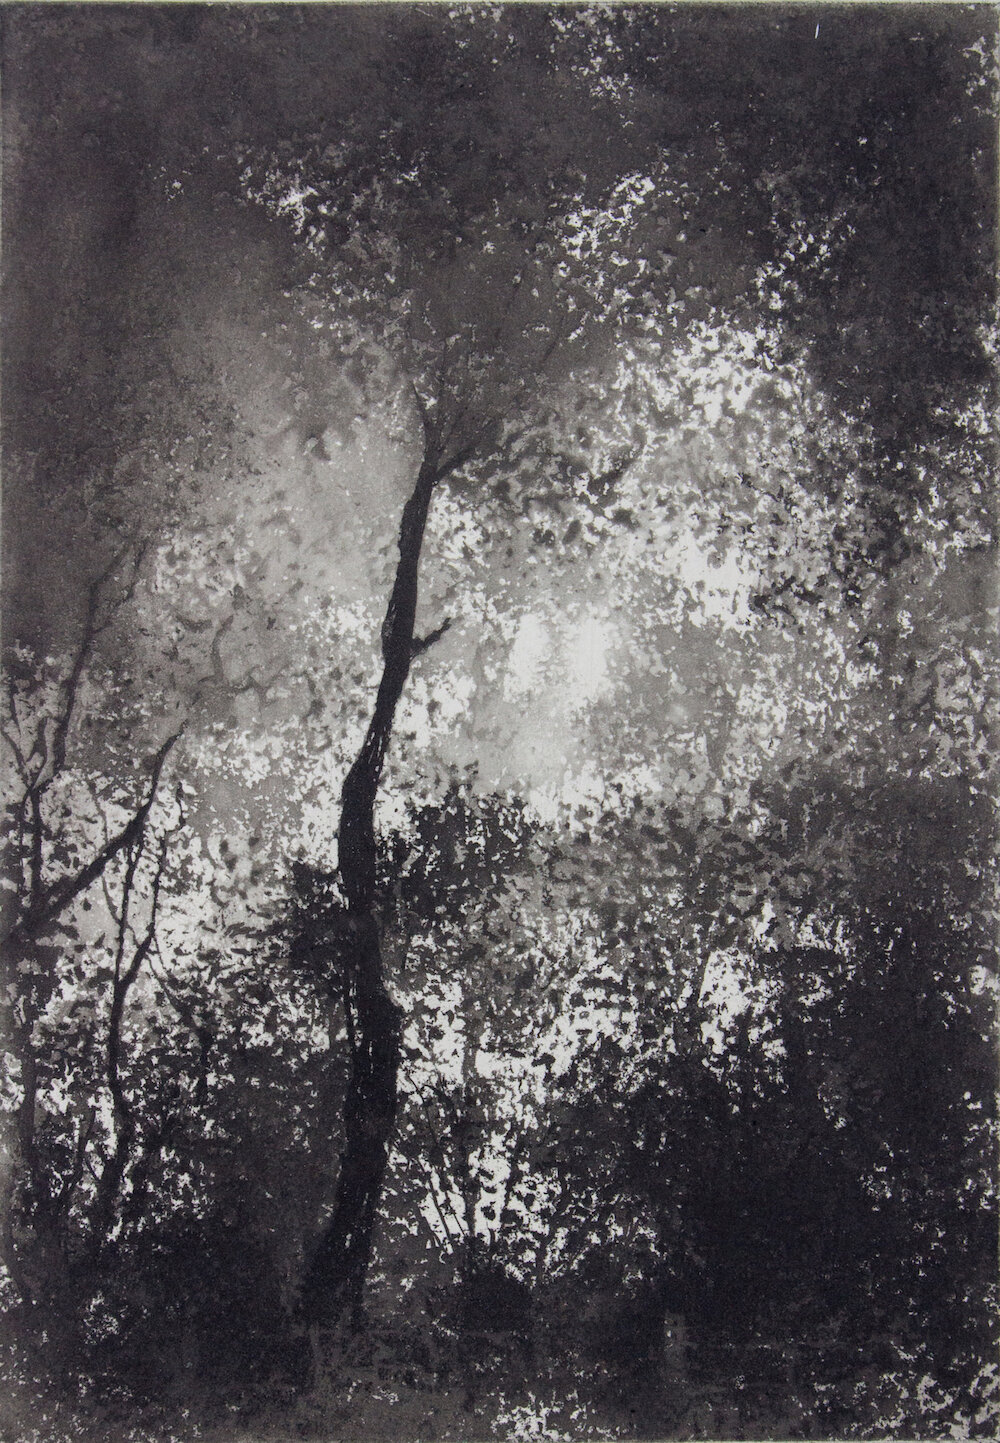 Fen Ditton Gallery + Trees Observed + Exhibition + Norman Ackroyd.jpeg